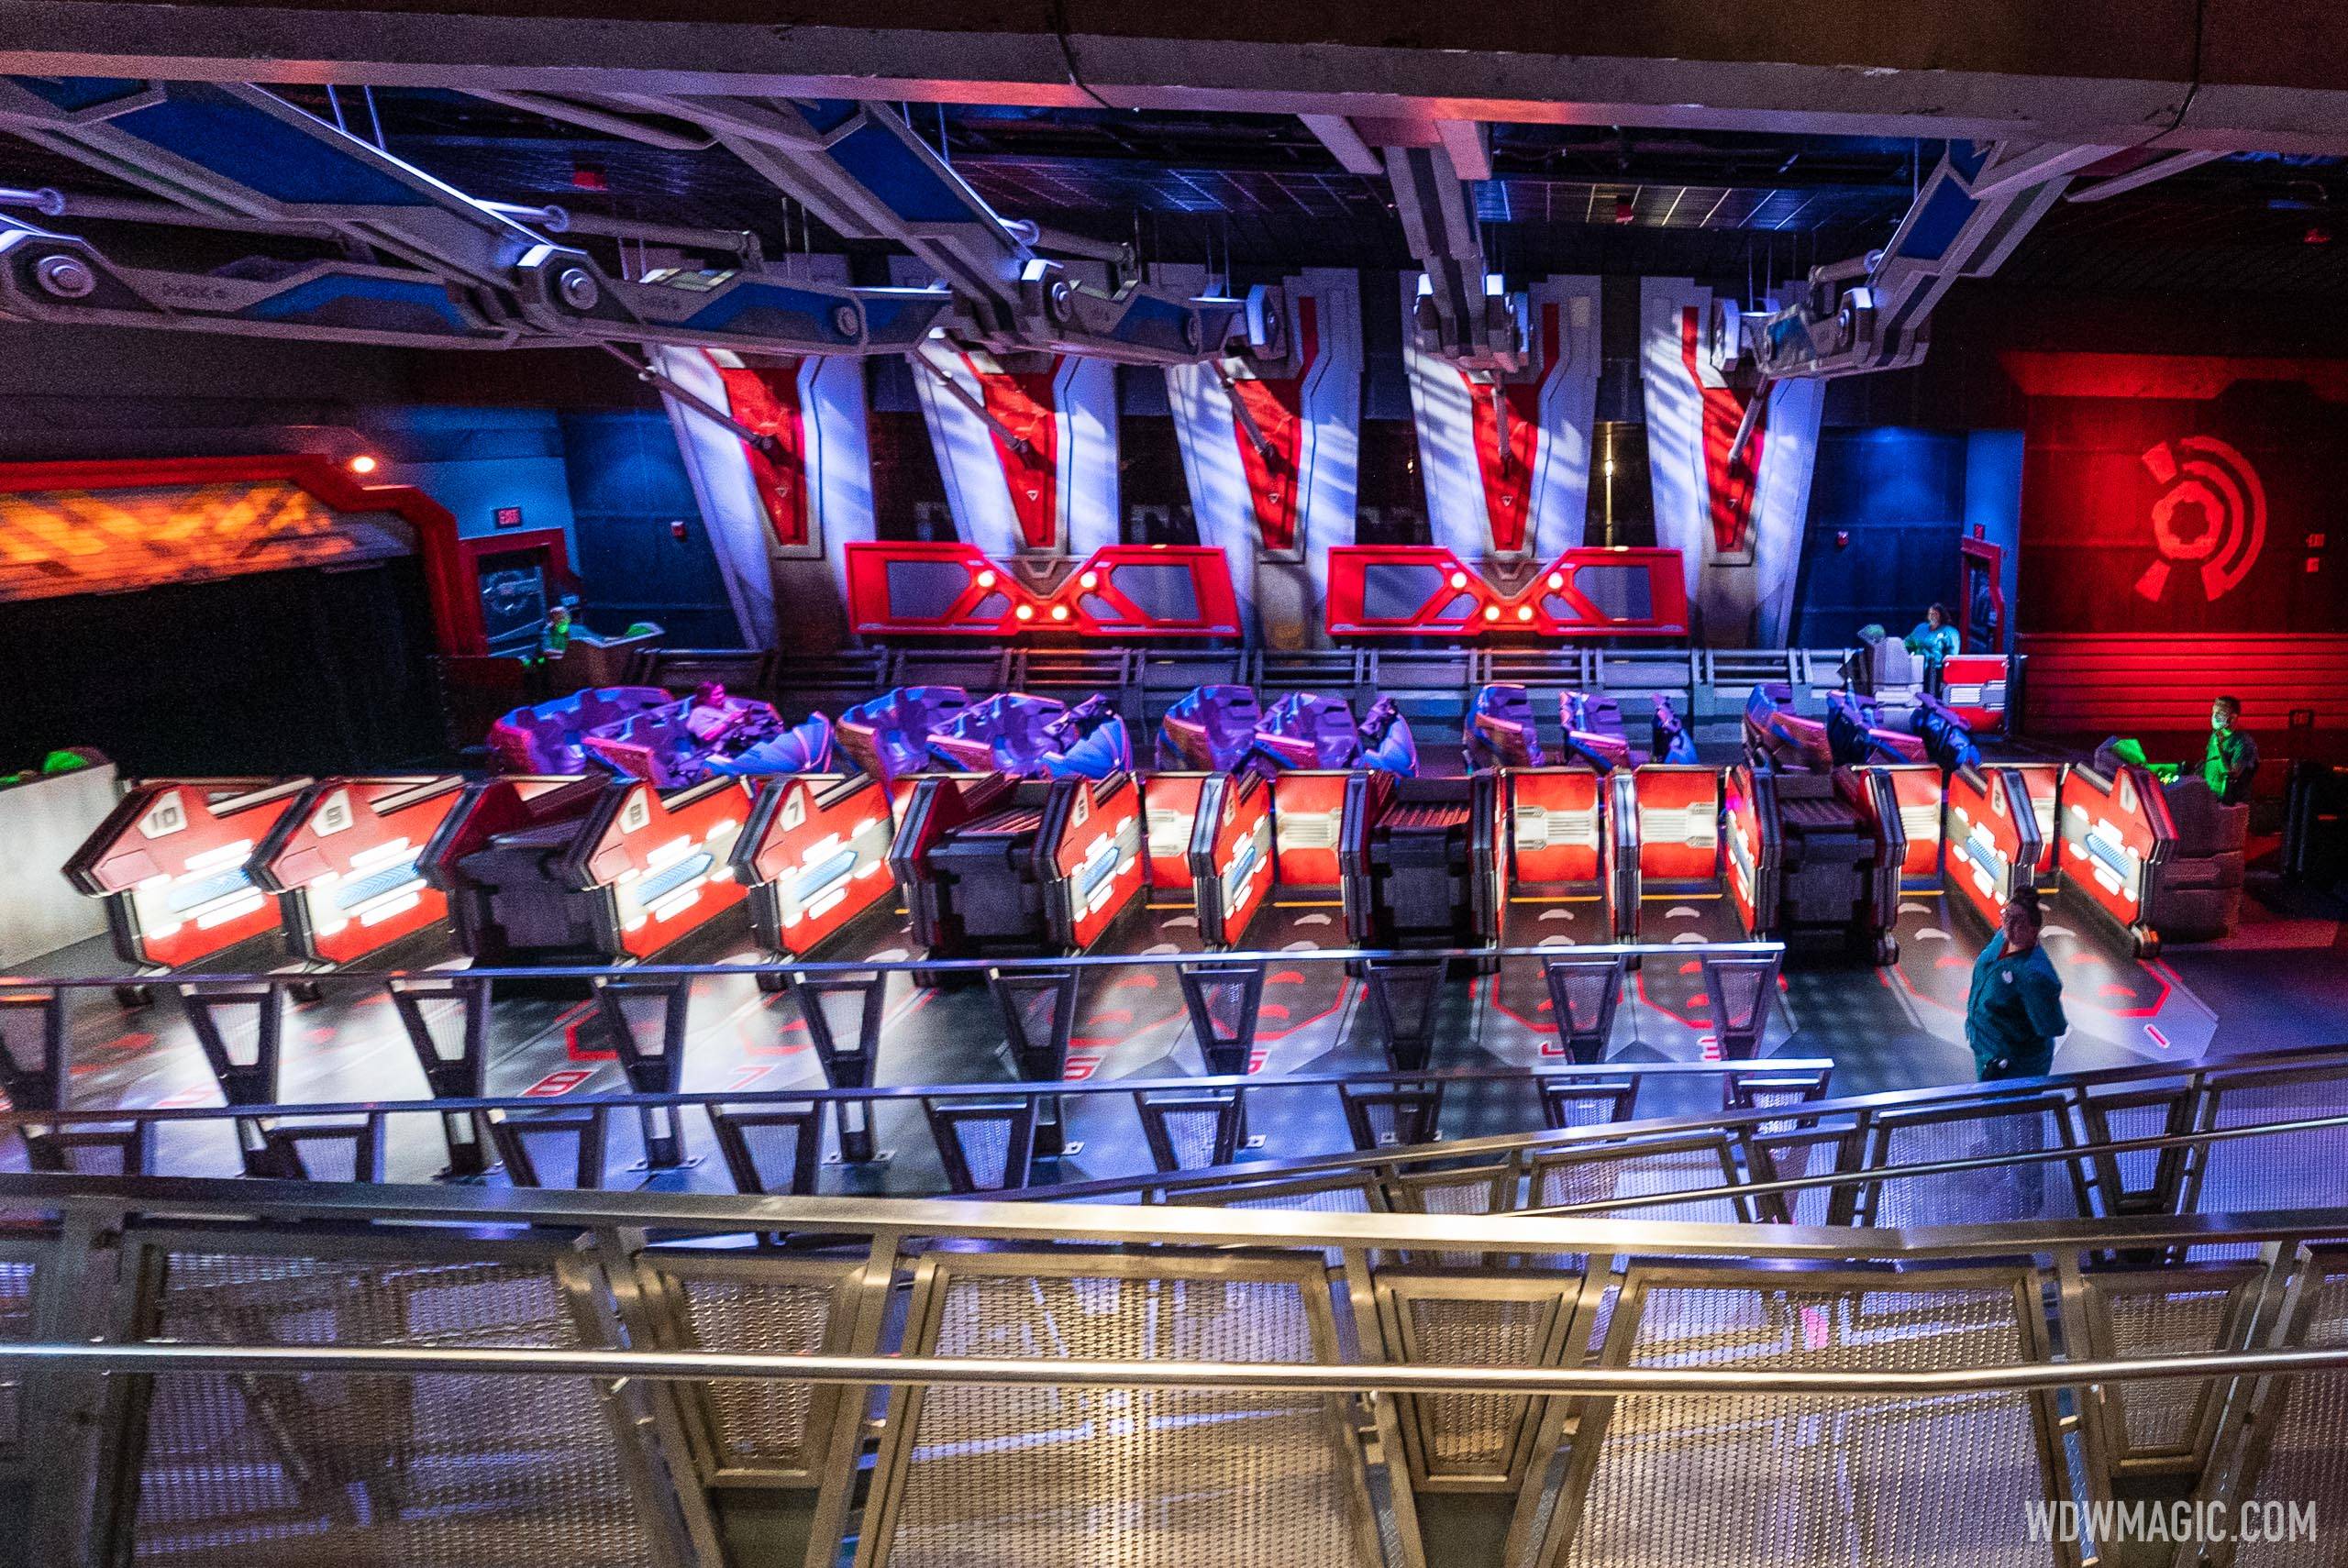 Guardians of the Galaxy Cosmic Rewind complete walk-through and tour